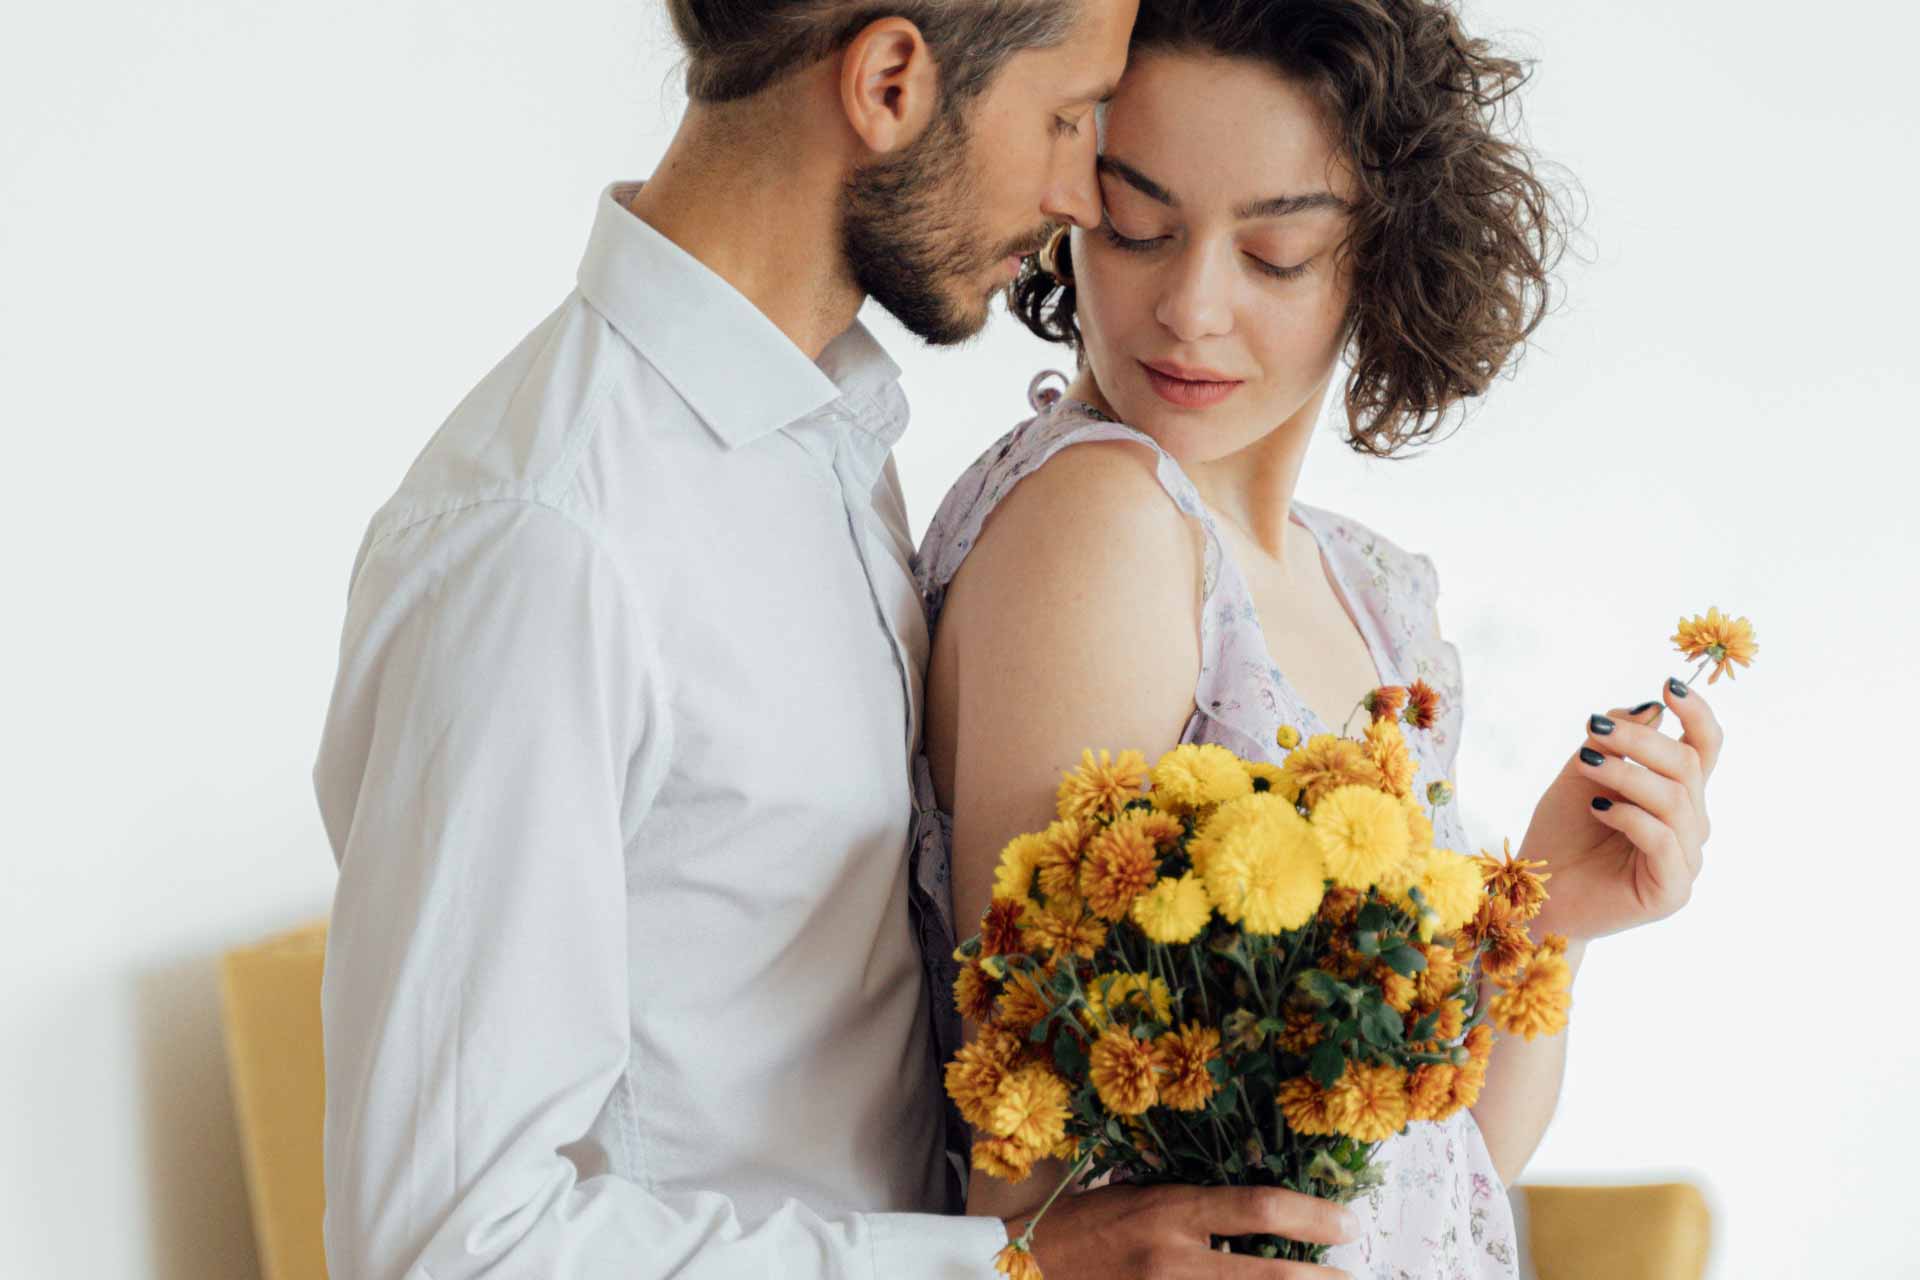 man giving flower bouquet to woman